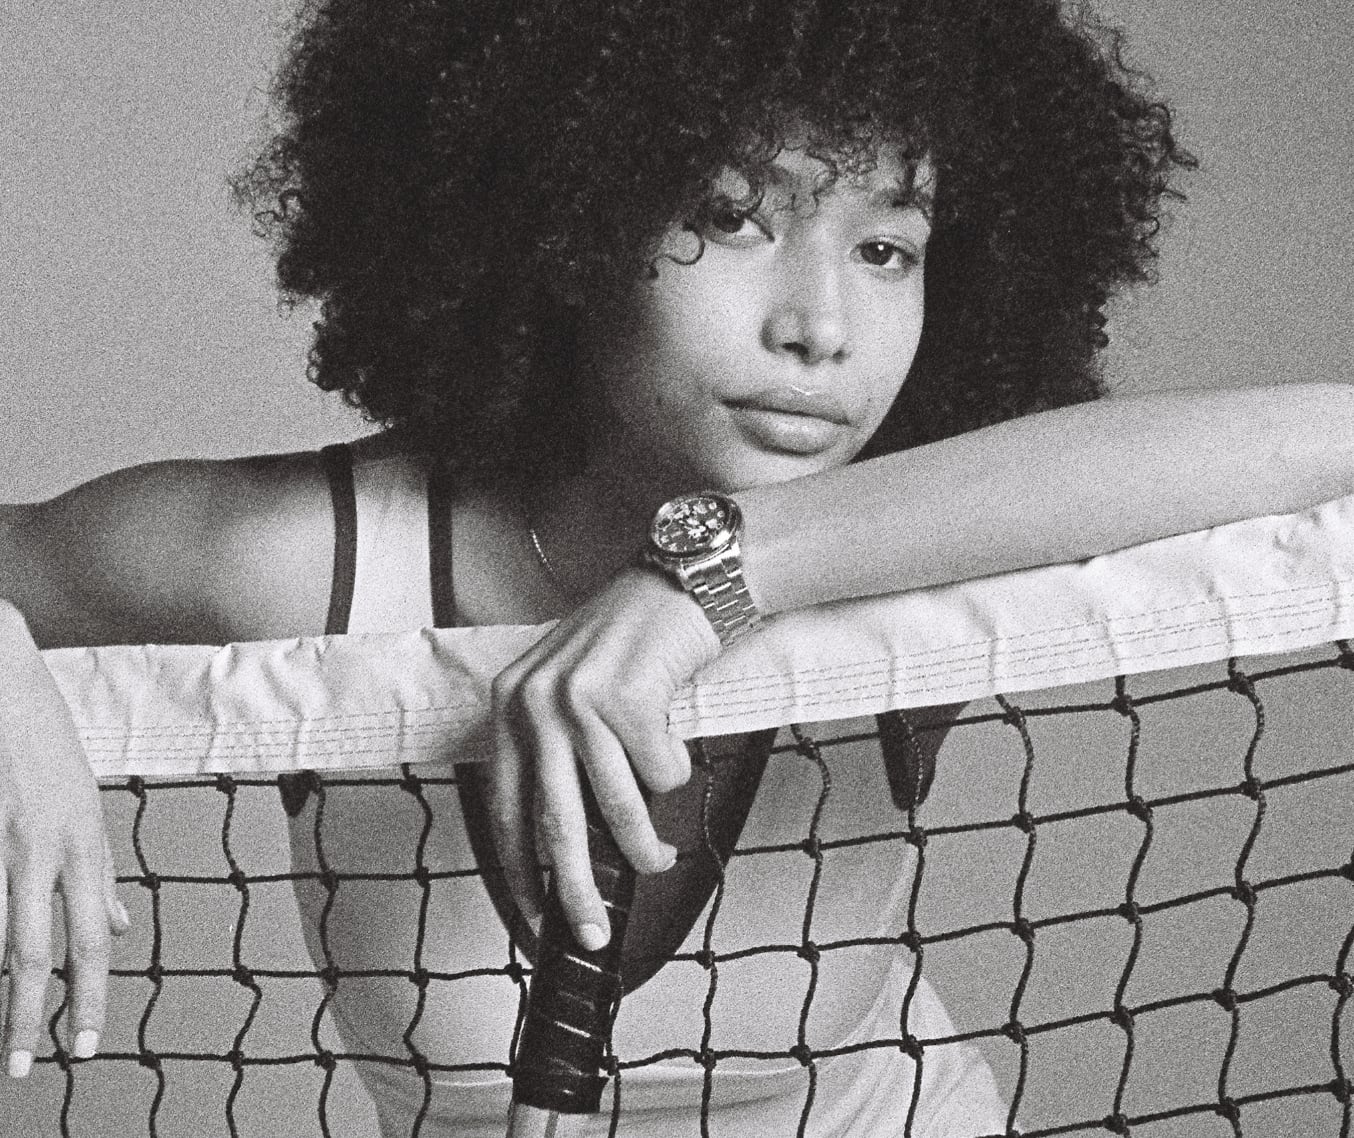 A black and white image of a woman casually leaning over a tennis net, holding a tennis racket. She's wearing a white tennis dress and our limited-edition Disney Mickey Mouse Tennis Watch.